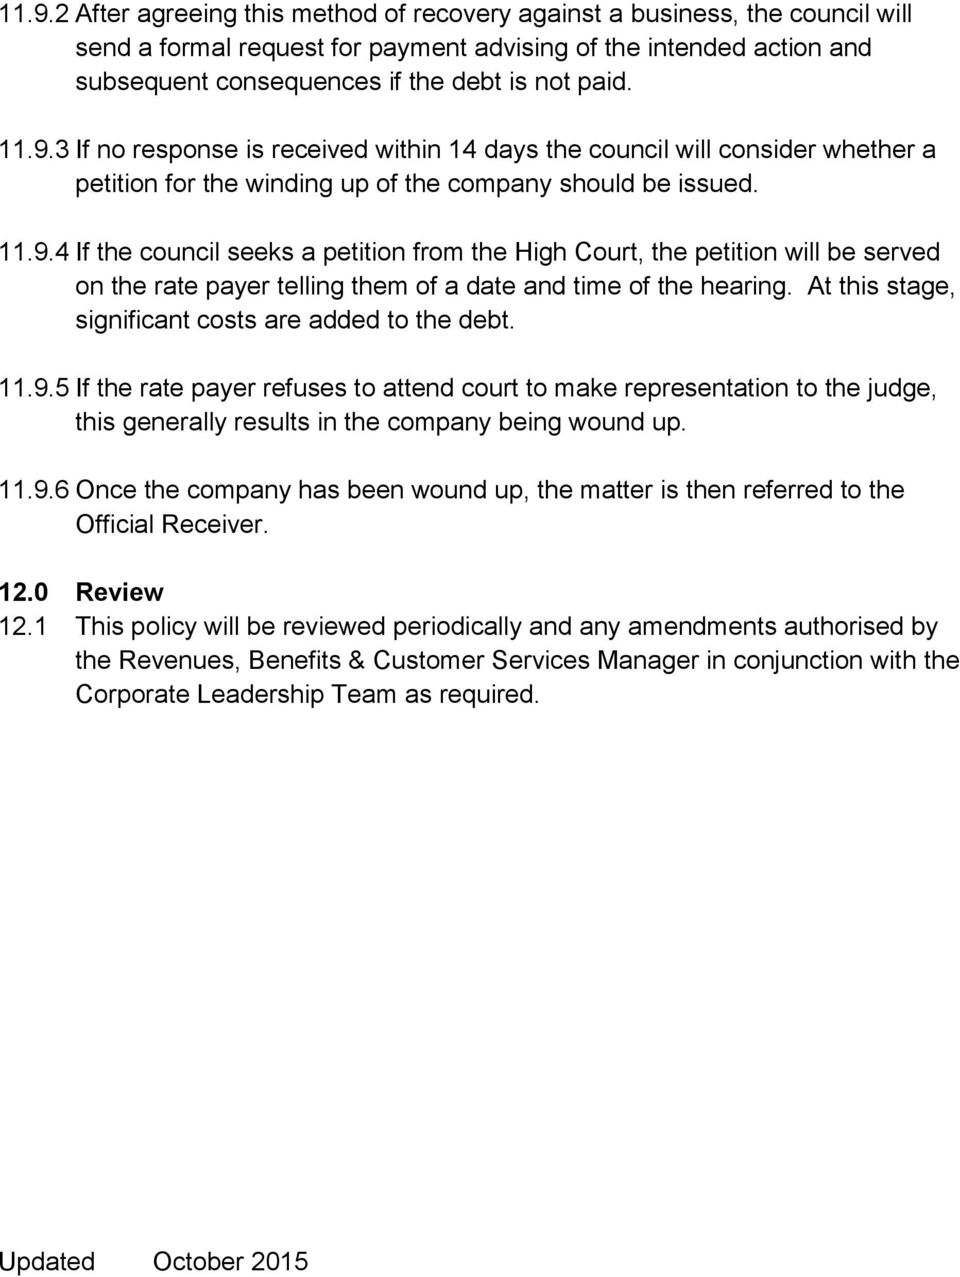 At this stage, significant costs are added to the debt. 11.9.5 If the rate payer refuses to attend court to make representation to the judge, this generally results in the company being wound up. 11.9.6 Once the company has been wound up, the matter is then referred to the Official Receiver.